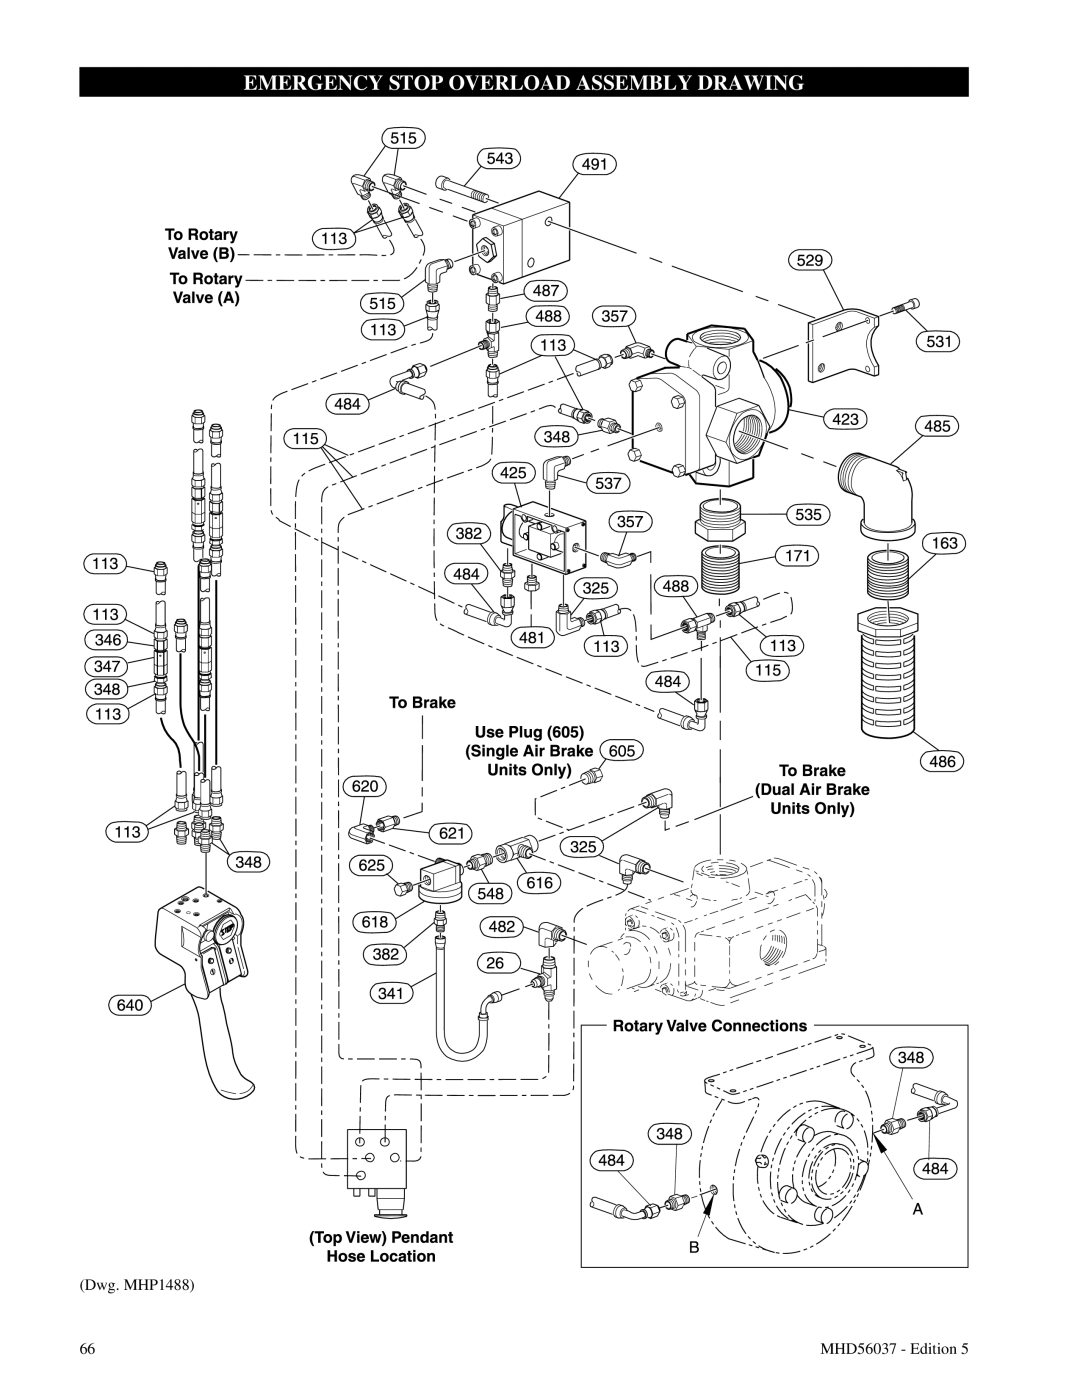 Ingersoll-Rand FA5T manual Emergency Stop Overload Assembly Drawing, Dwg. MHP1488, MHD56037 - Edition 